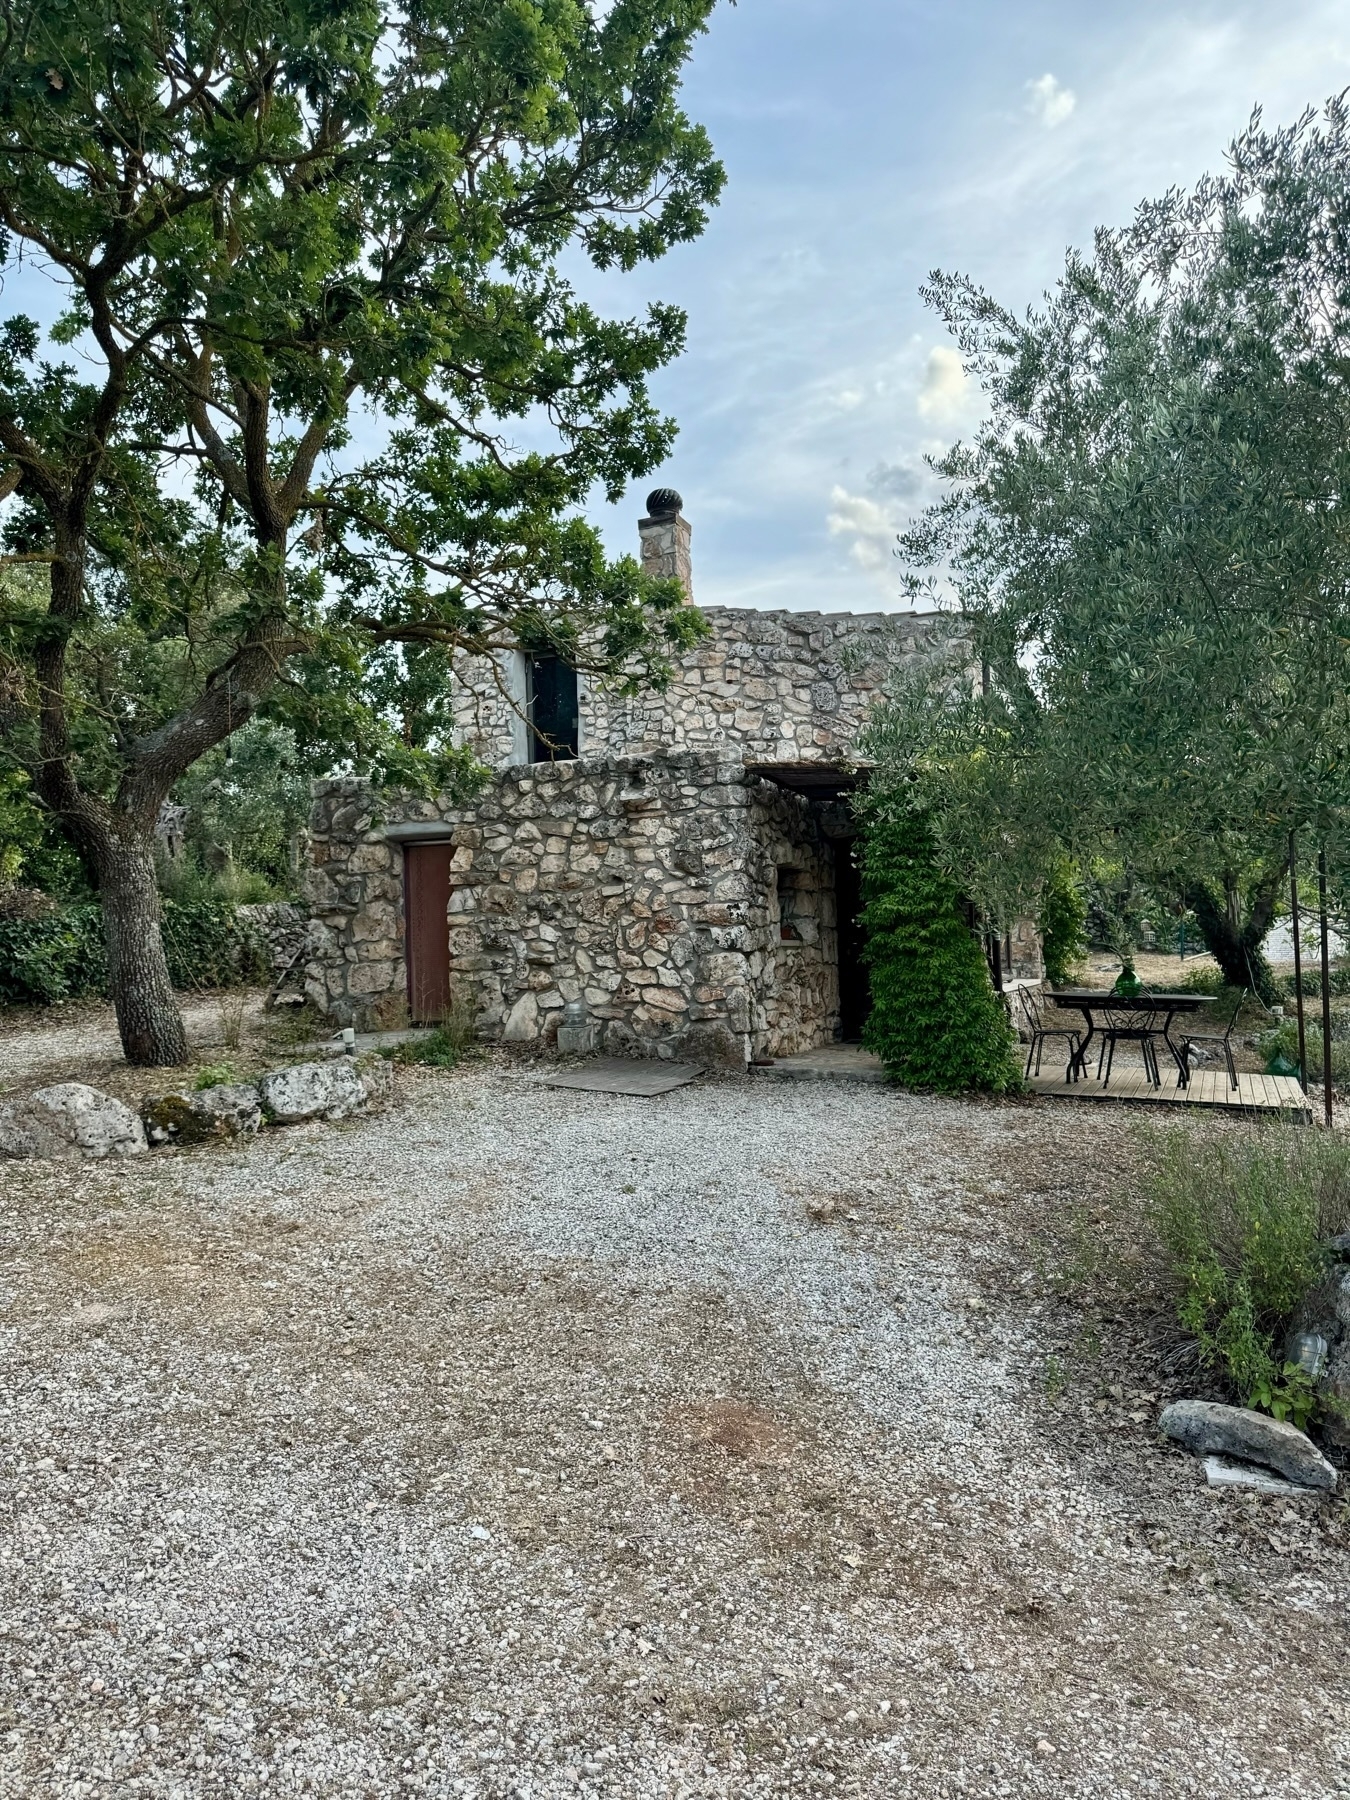 A rustic stone house surrounded by trees and greenery. There is a small patio area with a metal table and chairs on the right. The ground is covered in gravel and there is an old wooden door on the house. The sky is partly cloudy.